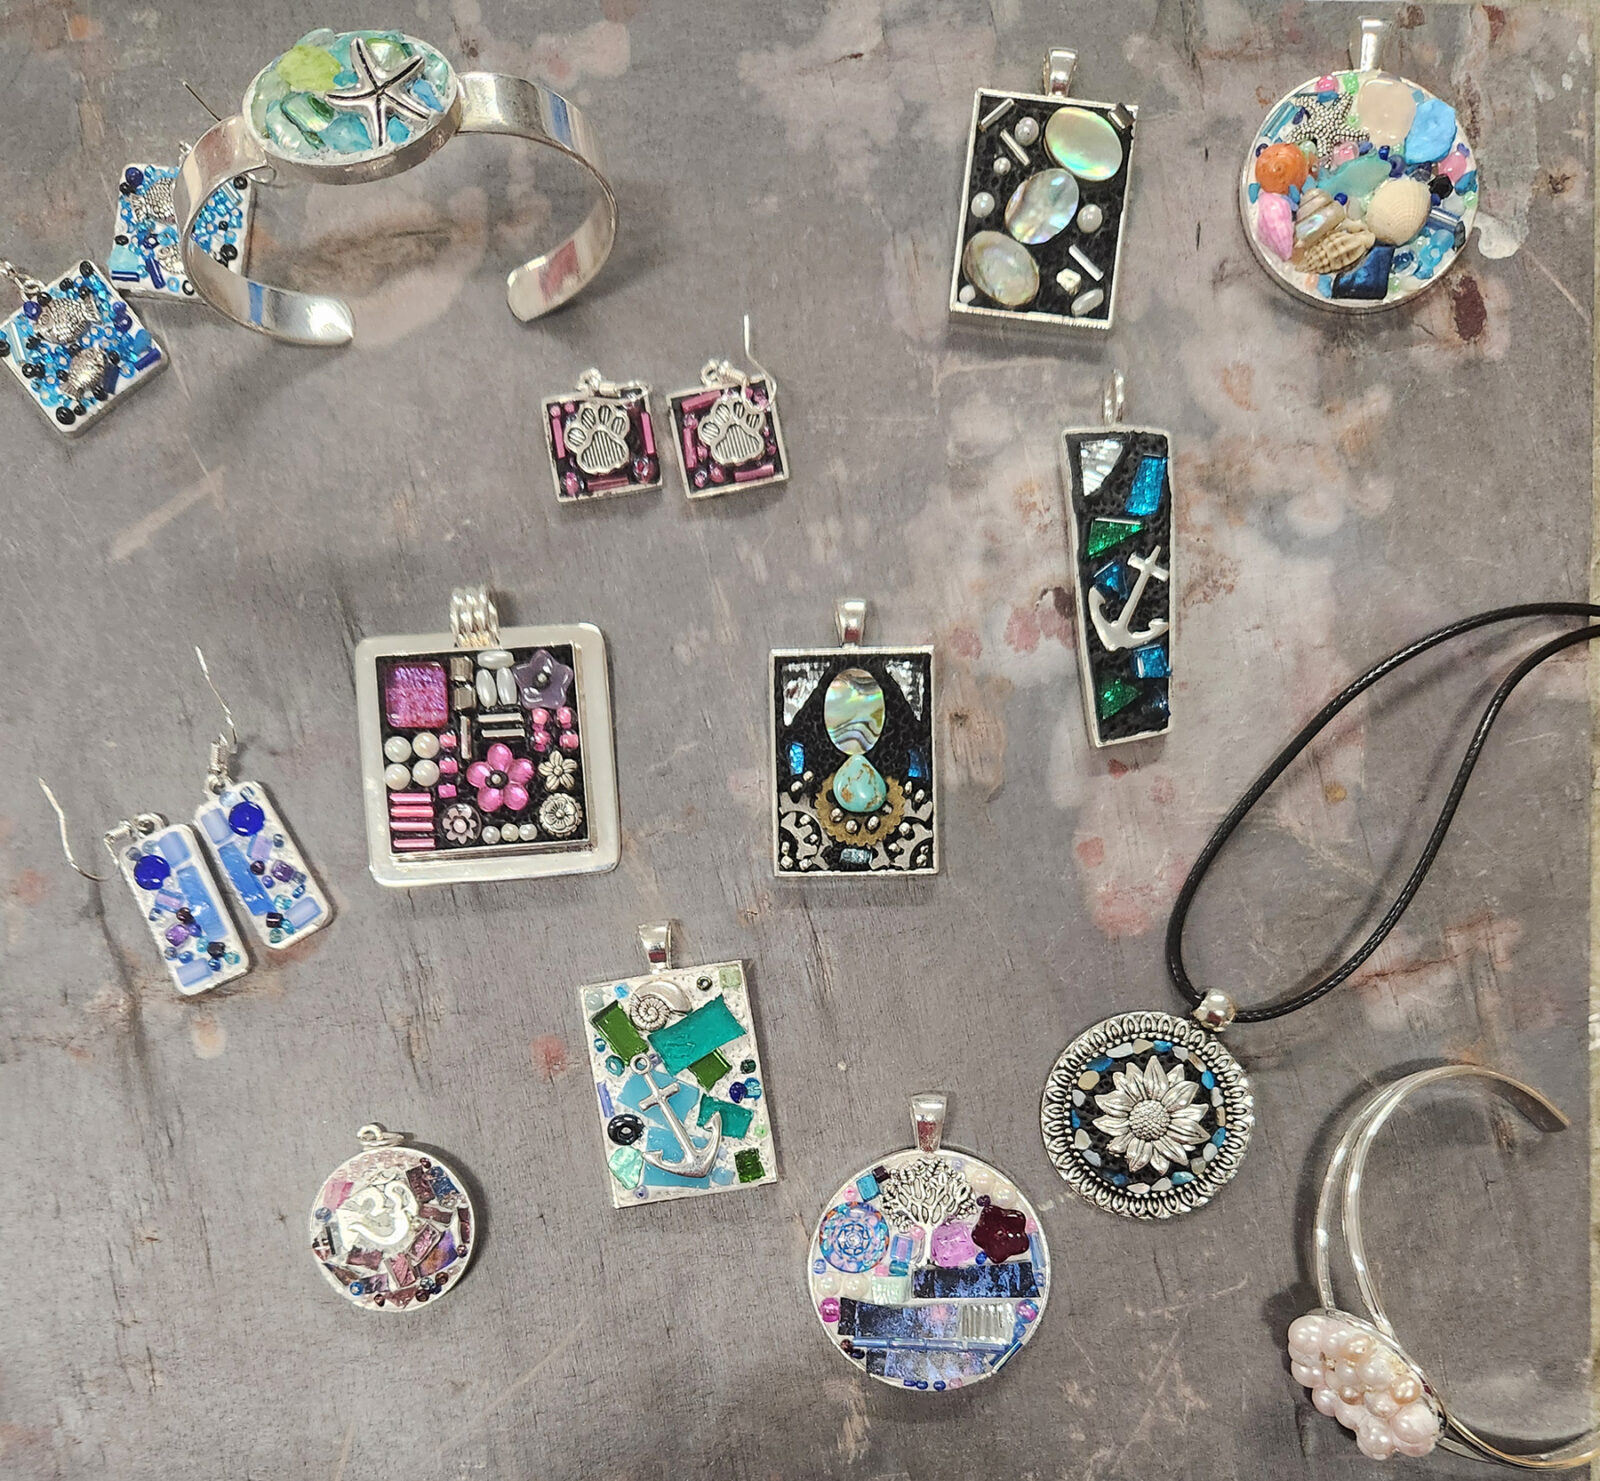 Ladies' Night Out Mosaic Jewelry